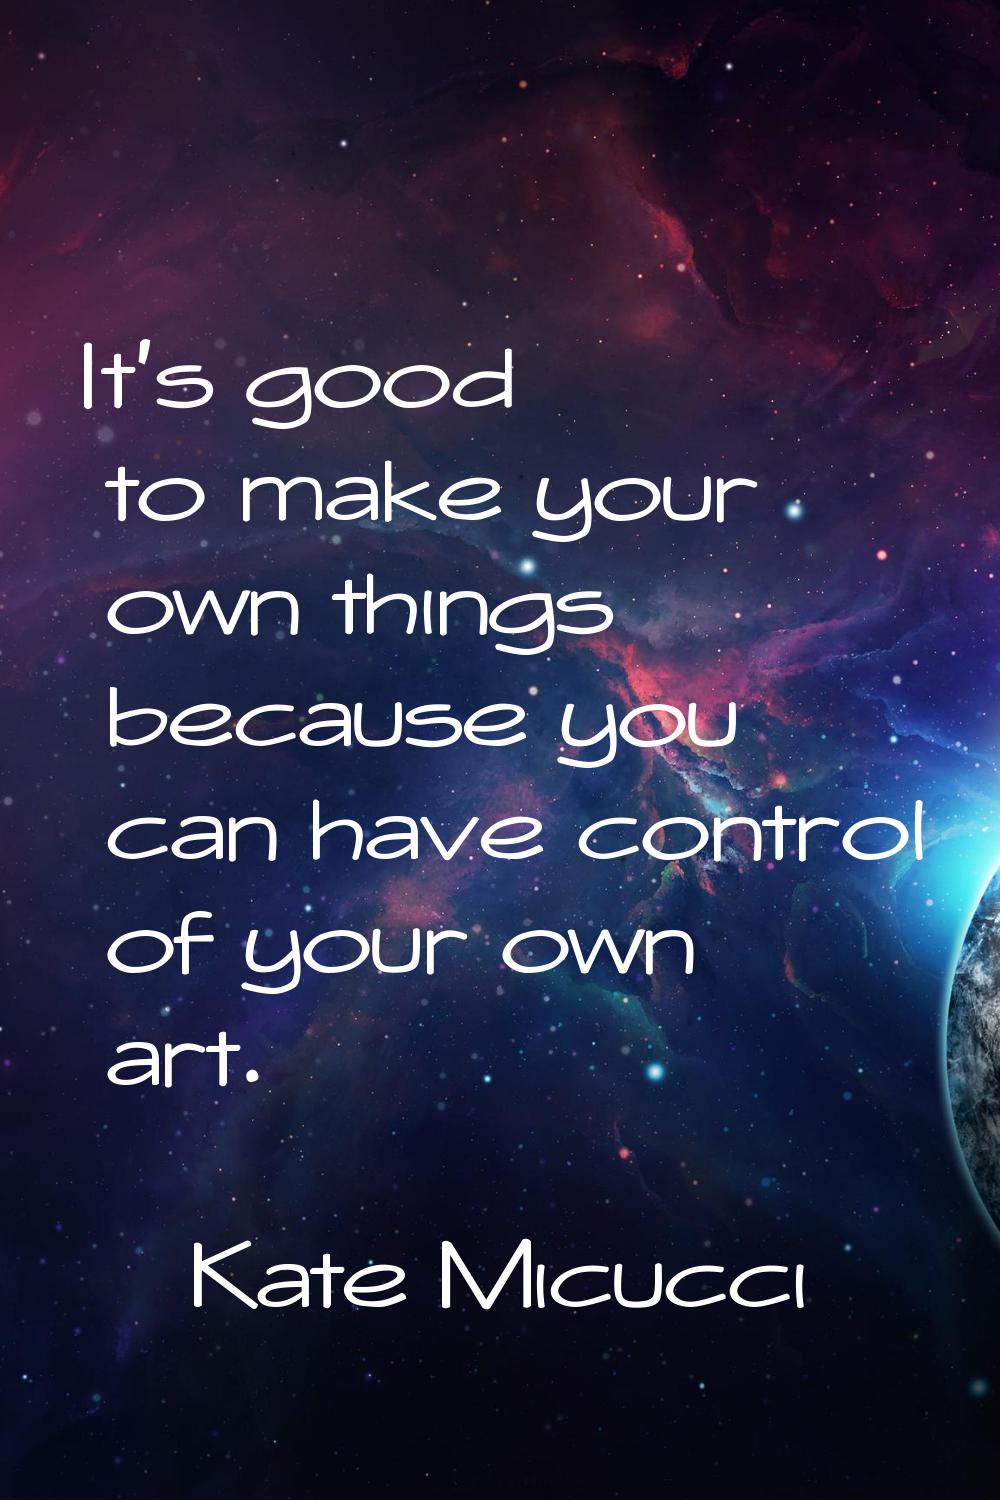 It's good to make your own things because you can have control of your own art.